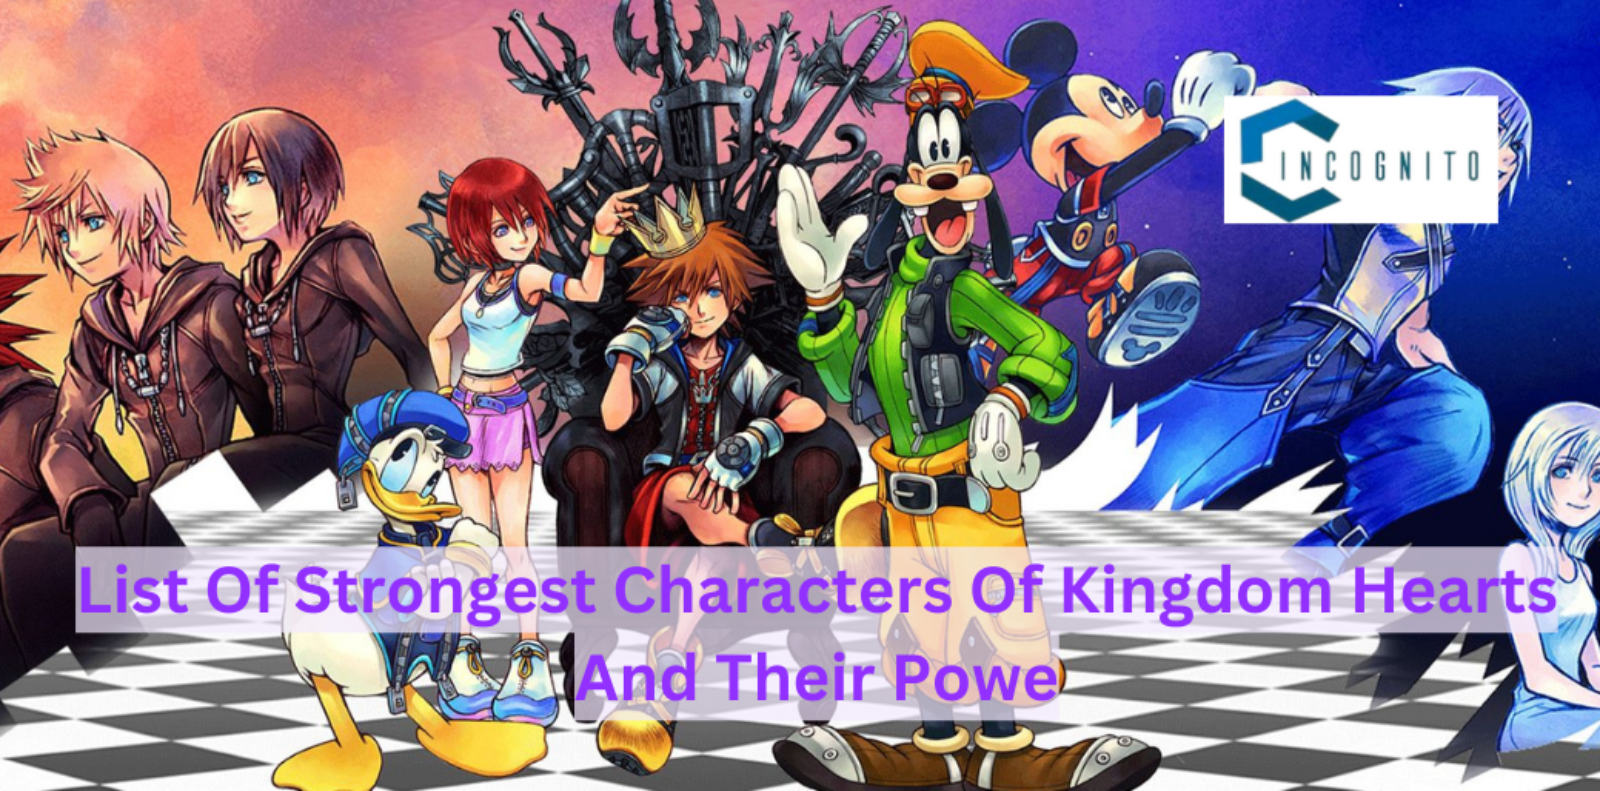 List Of Strongest Characters Of Kingdom Hearts And Their Power Details!